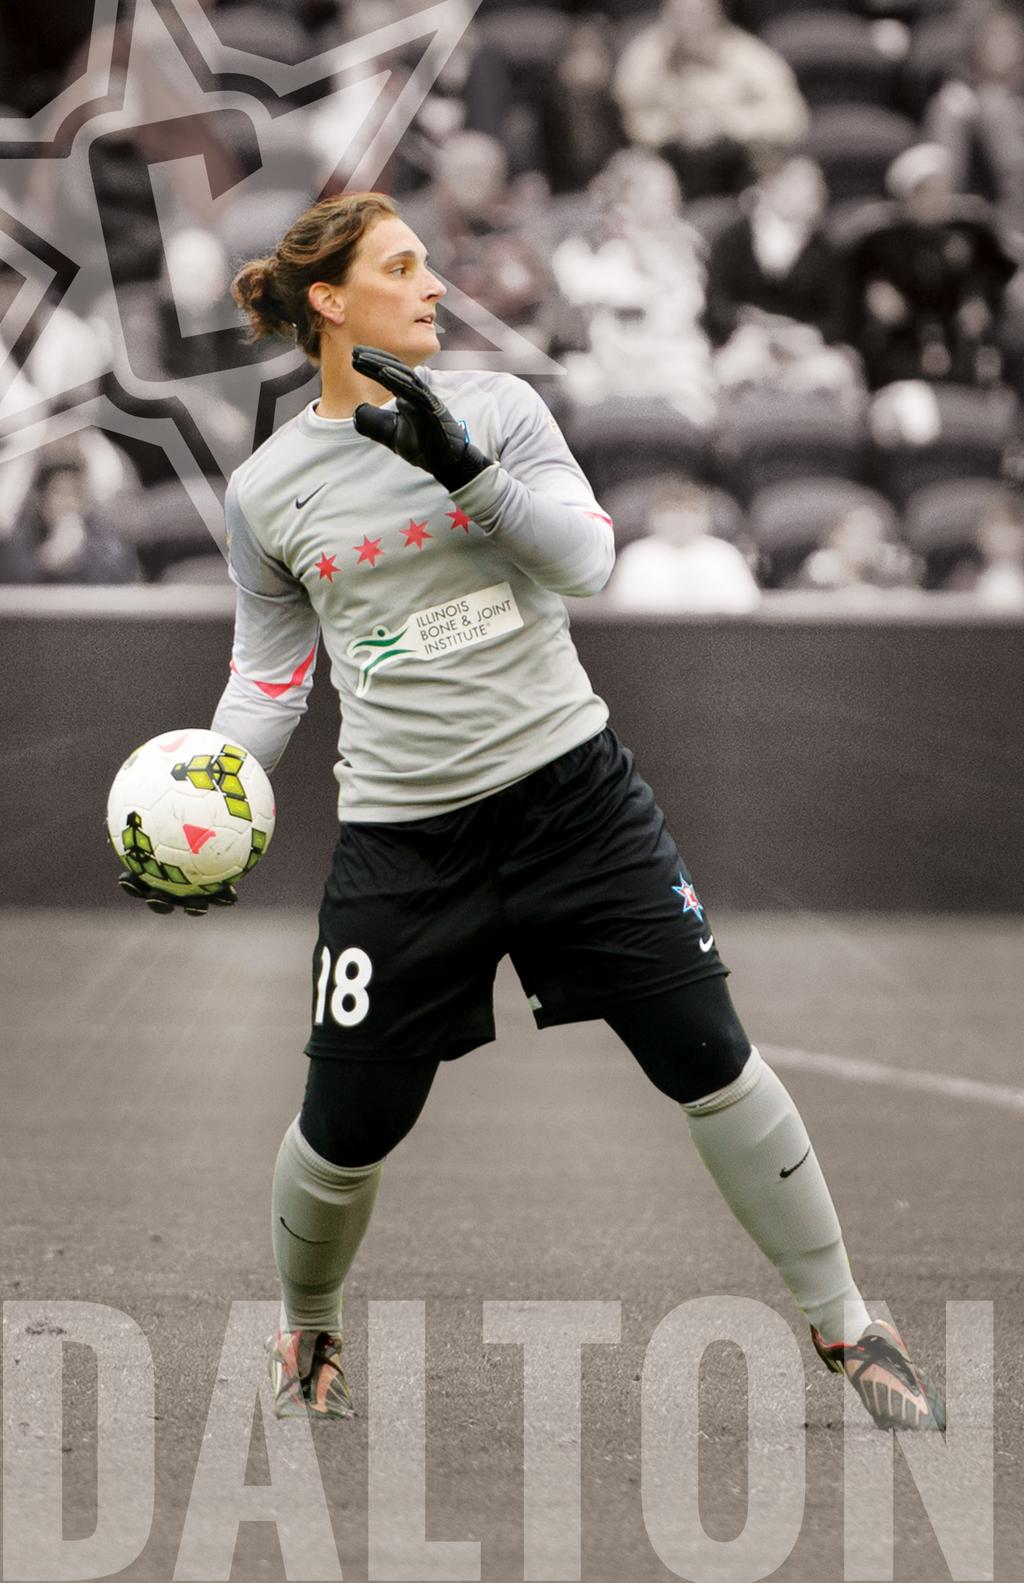 18Michele Dalton POSITION: GOALKEEPER HEIGHT: 5-7 BORN: NOVEMBER 5, 1988 HOMETOWN: MOUNT PROSPECT, IL COLLEGE: UNIVERSITY OF WISCONSIN PROFESSIONAL: 2015: Started in 12 games Goalkeeping leader in